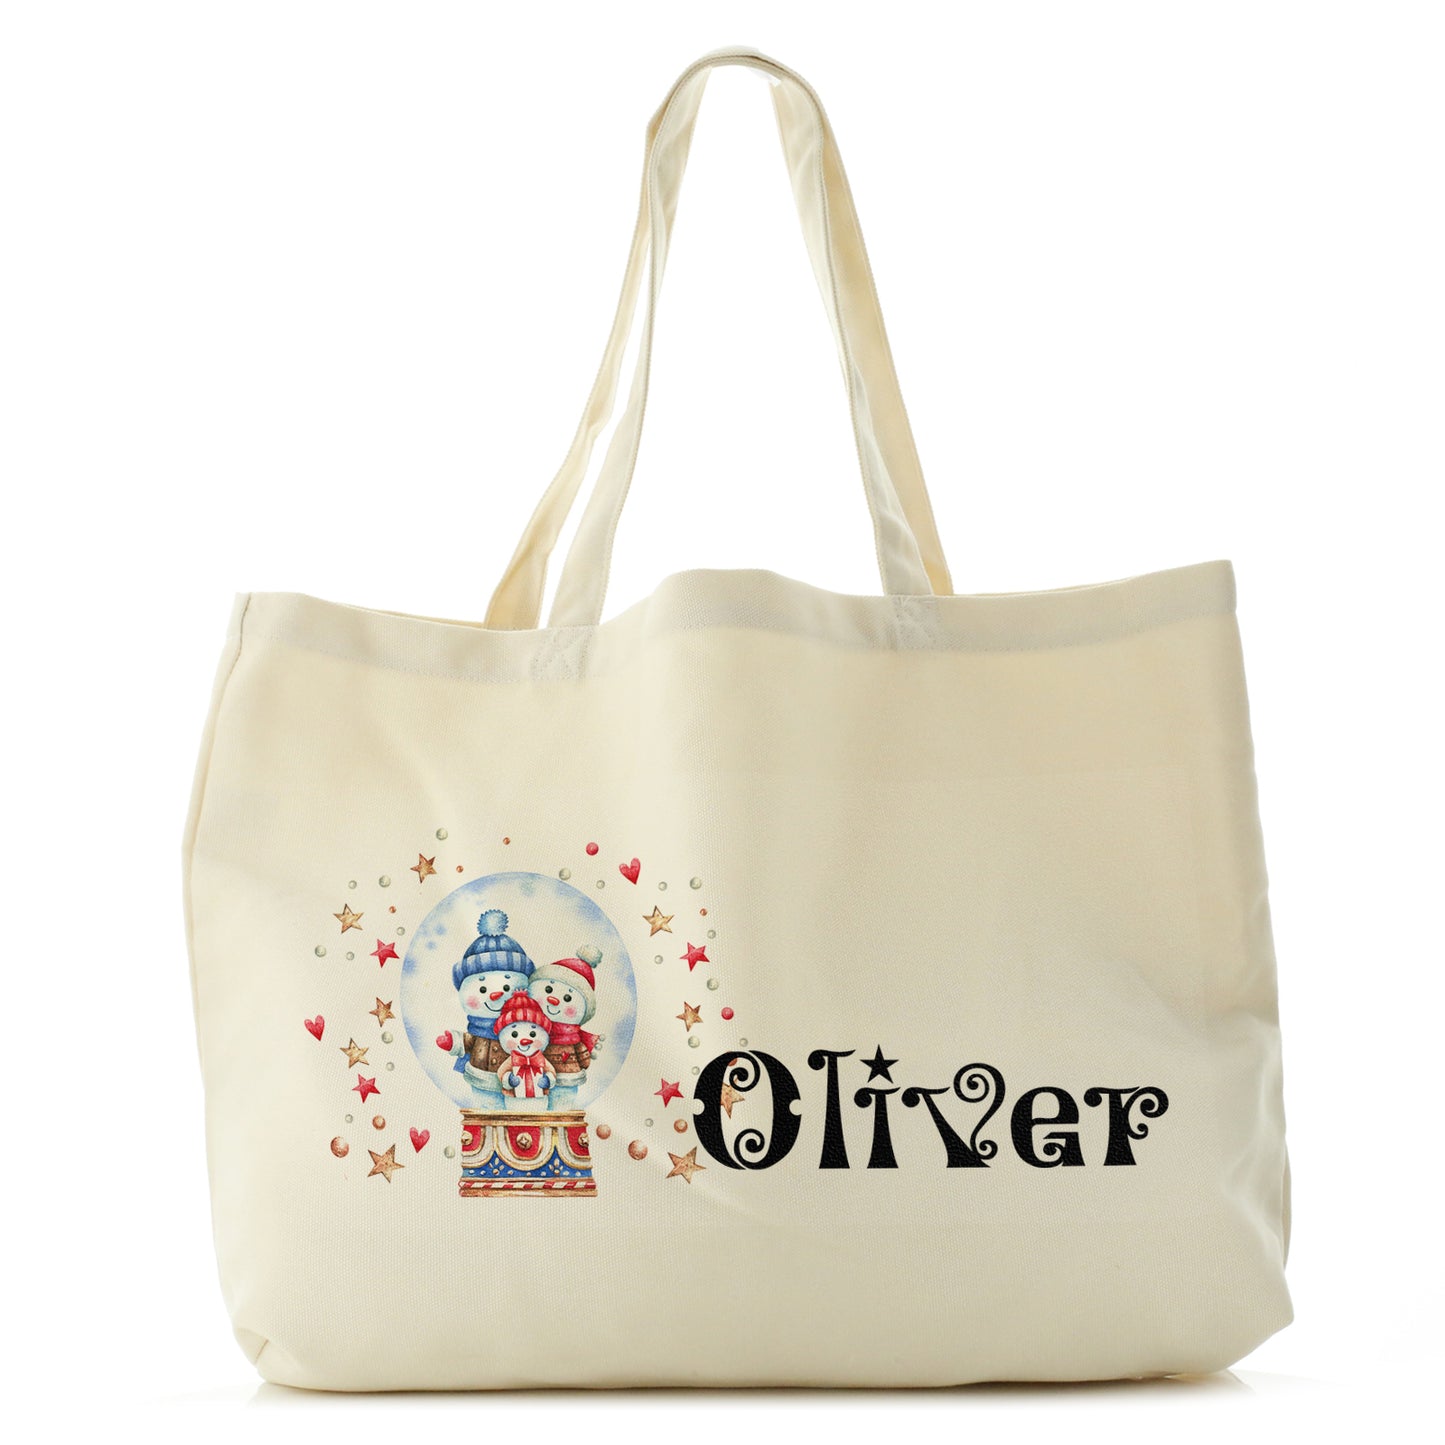 Personalised Canvas Tote Bag with Christmas Text and Snowman Family Snow Globe